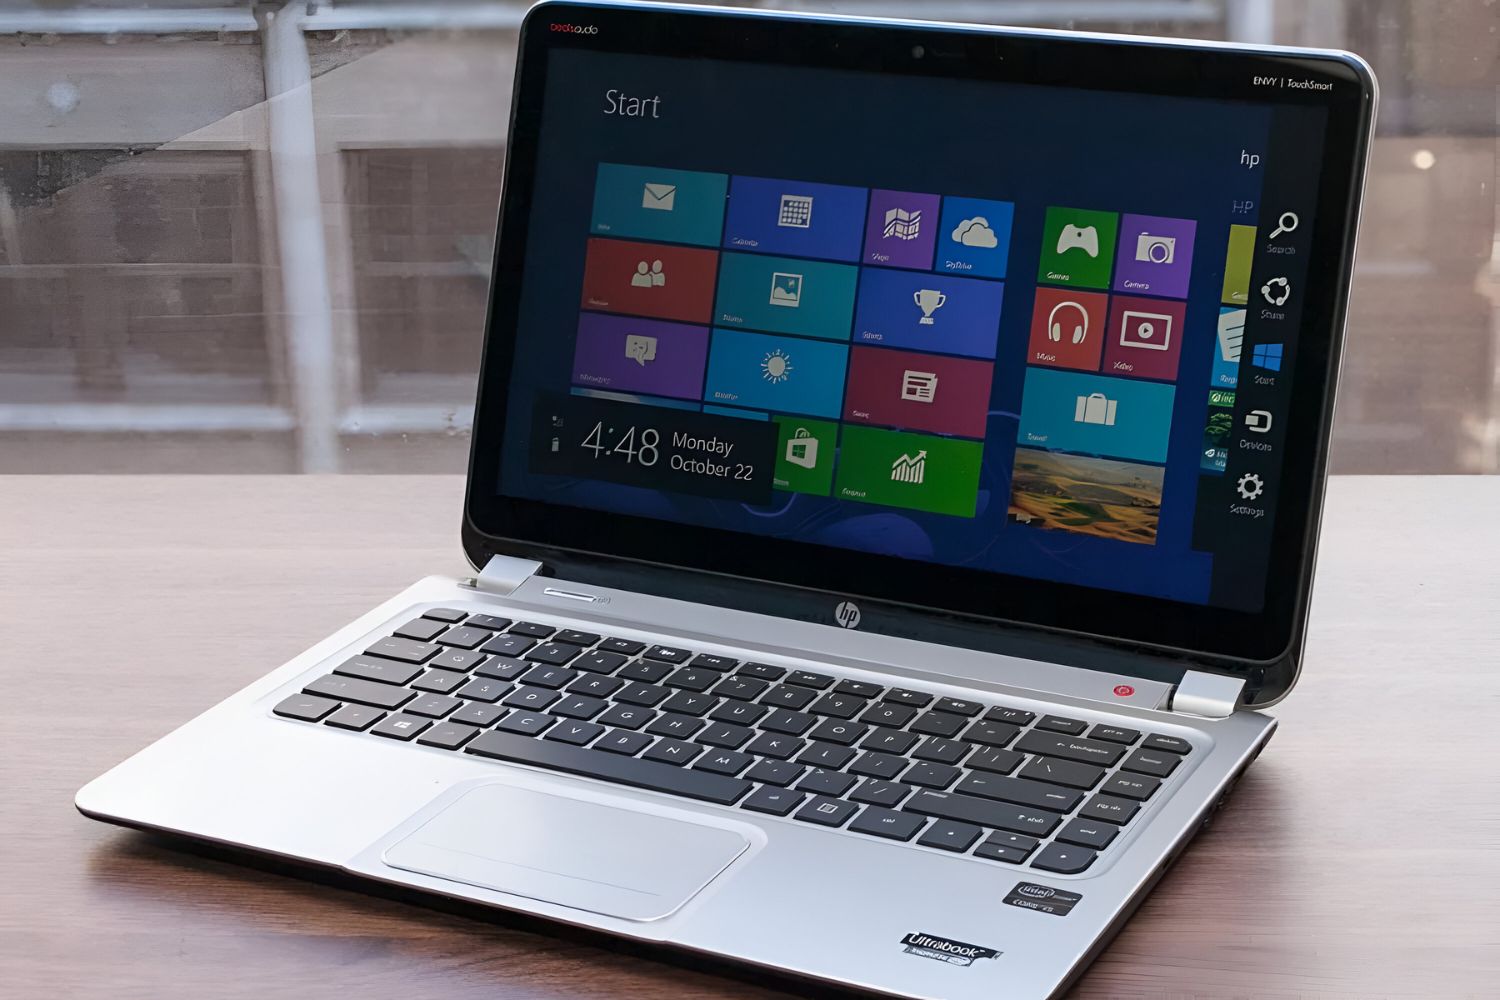 How To Recover Envy Ultrabook 4 Using Windows 10